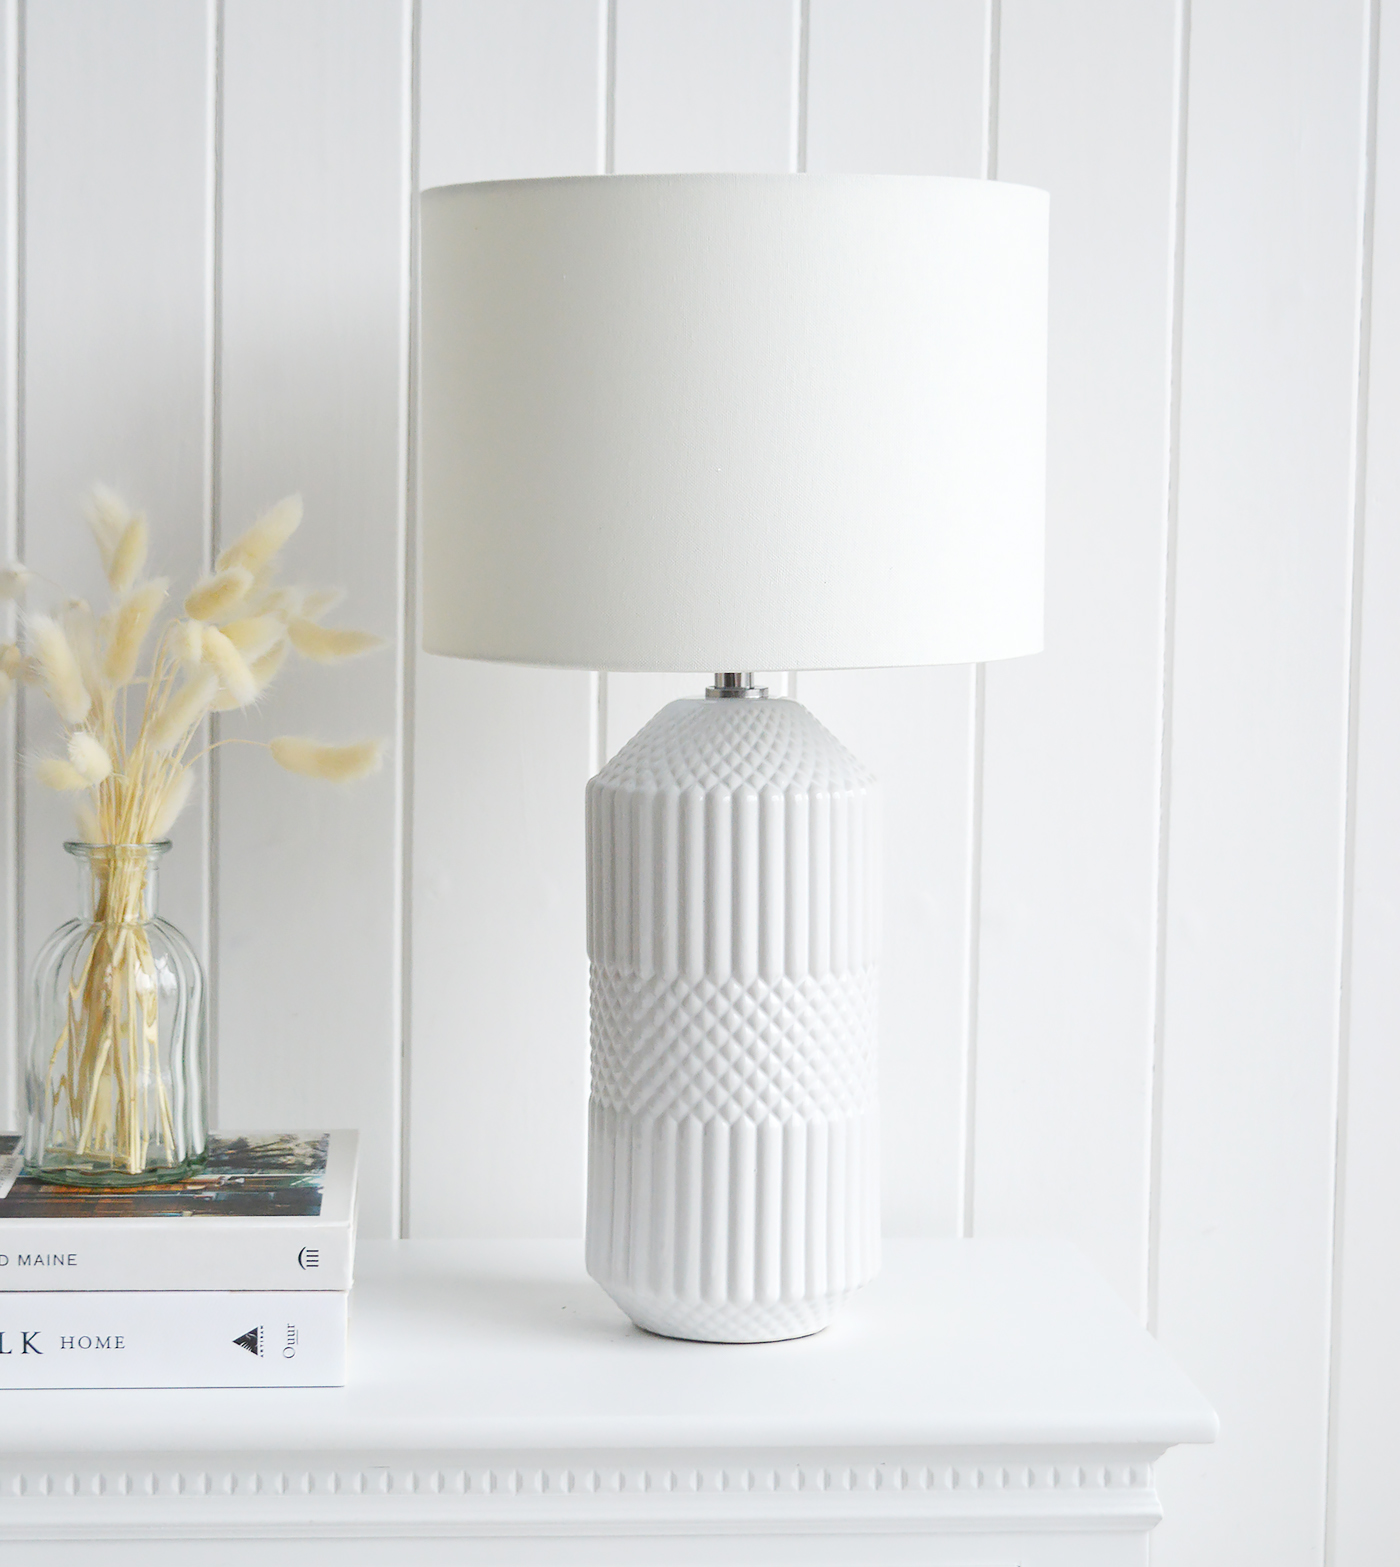 Castine White Ceramic table lamp for New England coastal, city and country home interiors from The White Lighthouse Furniture